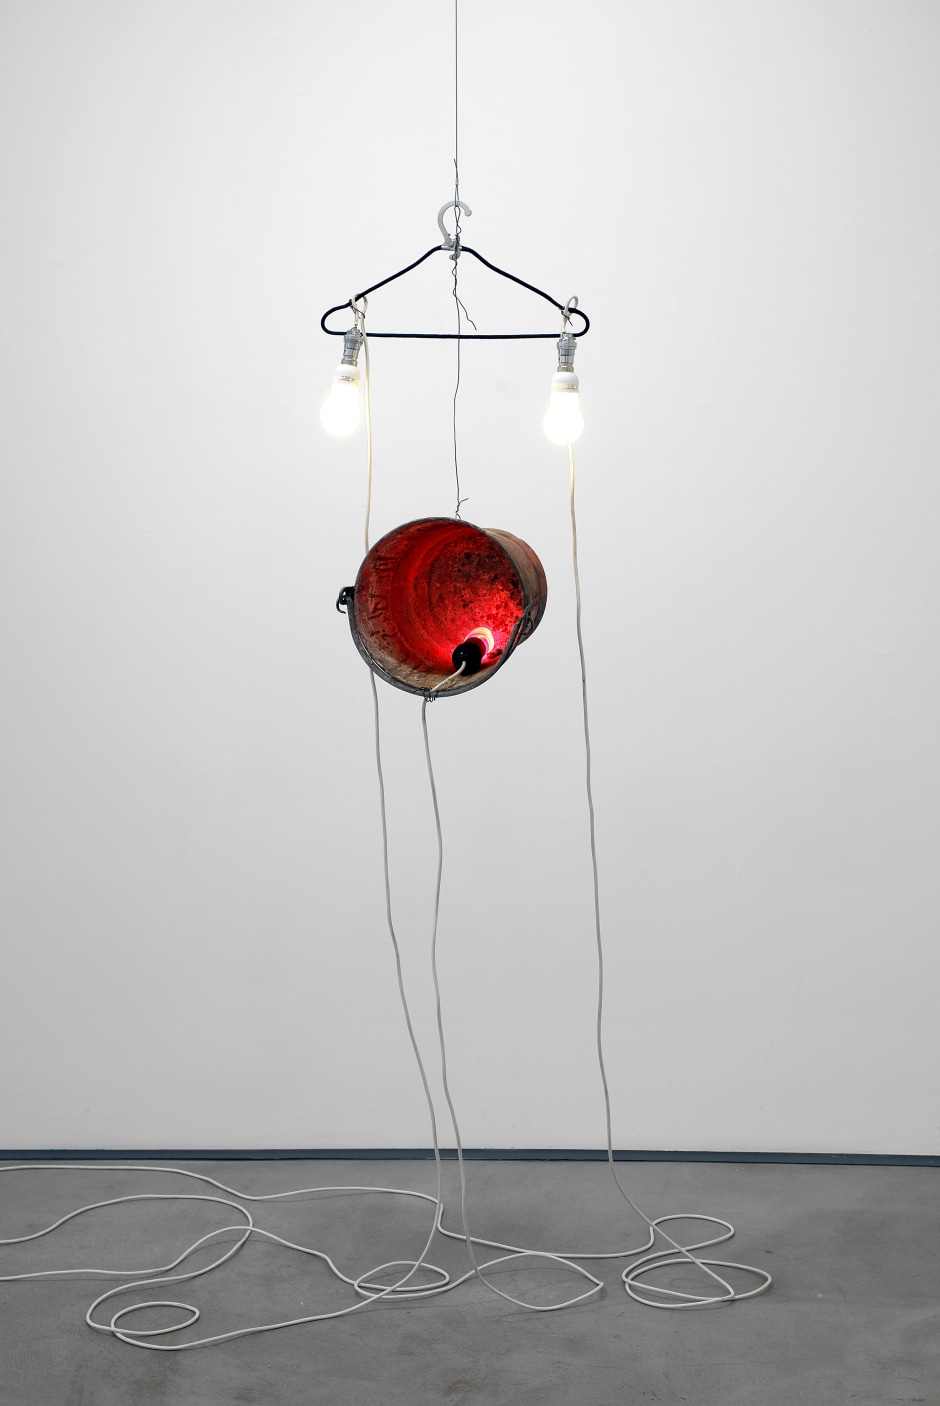 Sarah Lucas  Mary, 2012  bucket, hanger, lightbulbs, cable, wire  180 x 44 x 27 cm / 70 ⅞ x 17 ⅜ x 10 ⅝ in  © Sarah Lucas. Courtesy the Artist and Sadie Coles HQ, London.